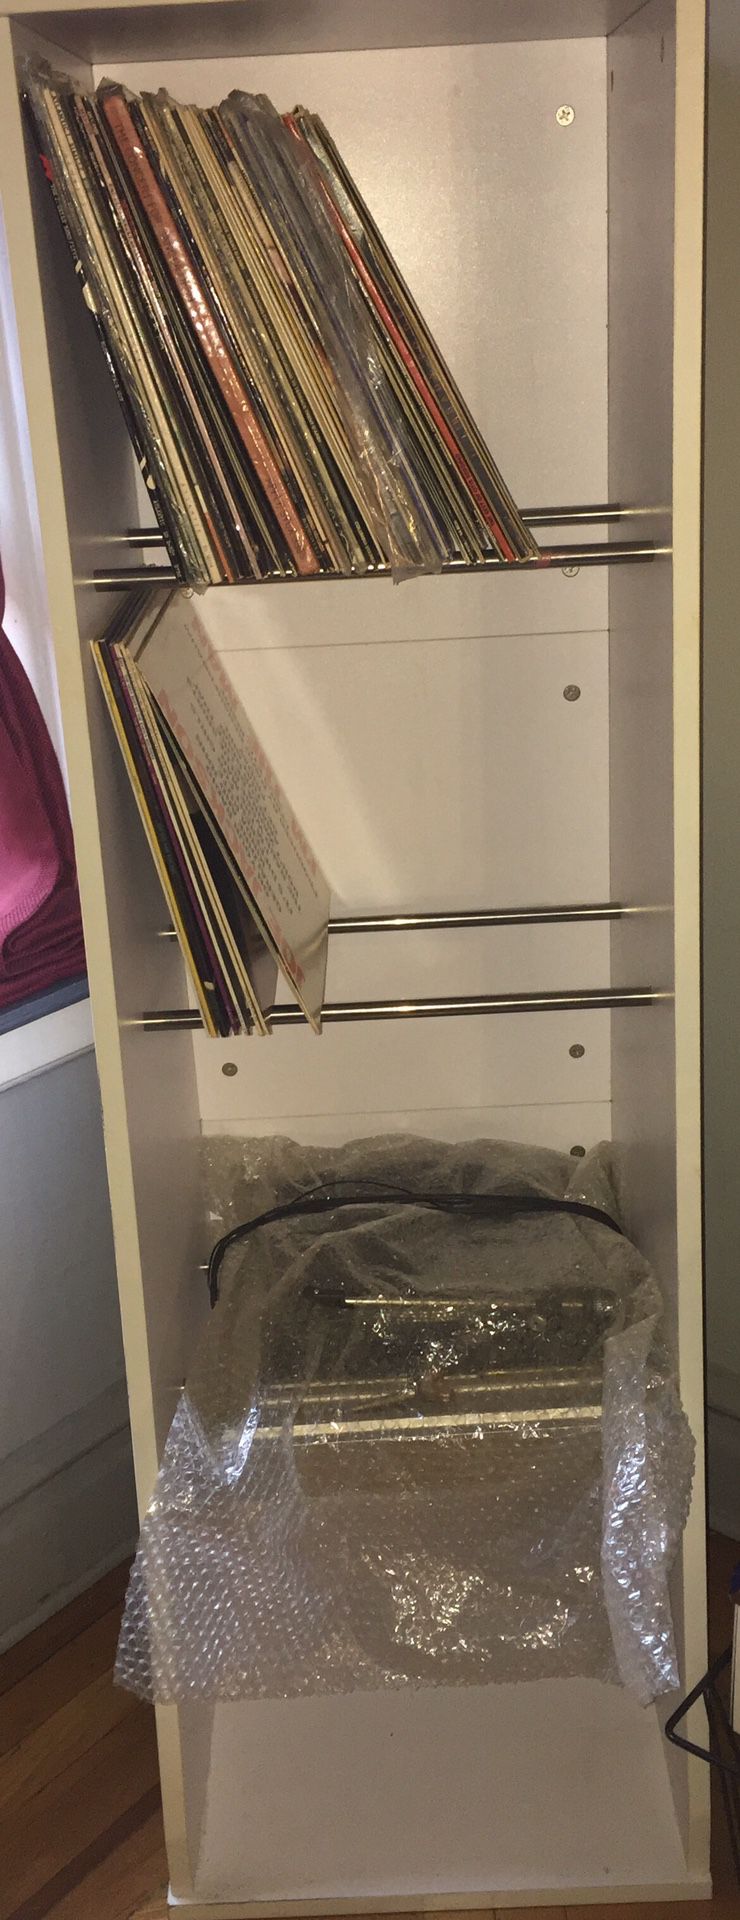 Record album holder or get creative and make it a child’s wardrobe